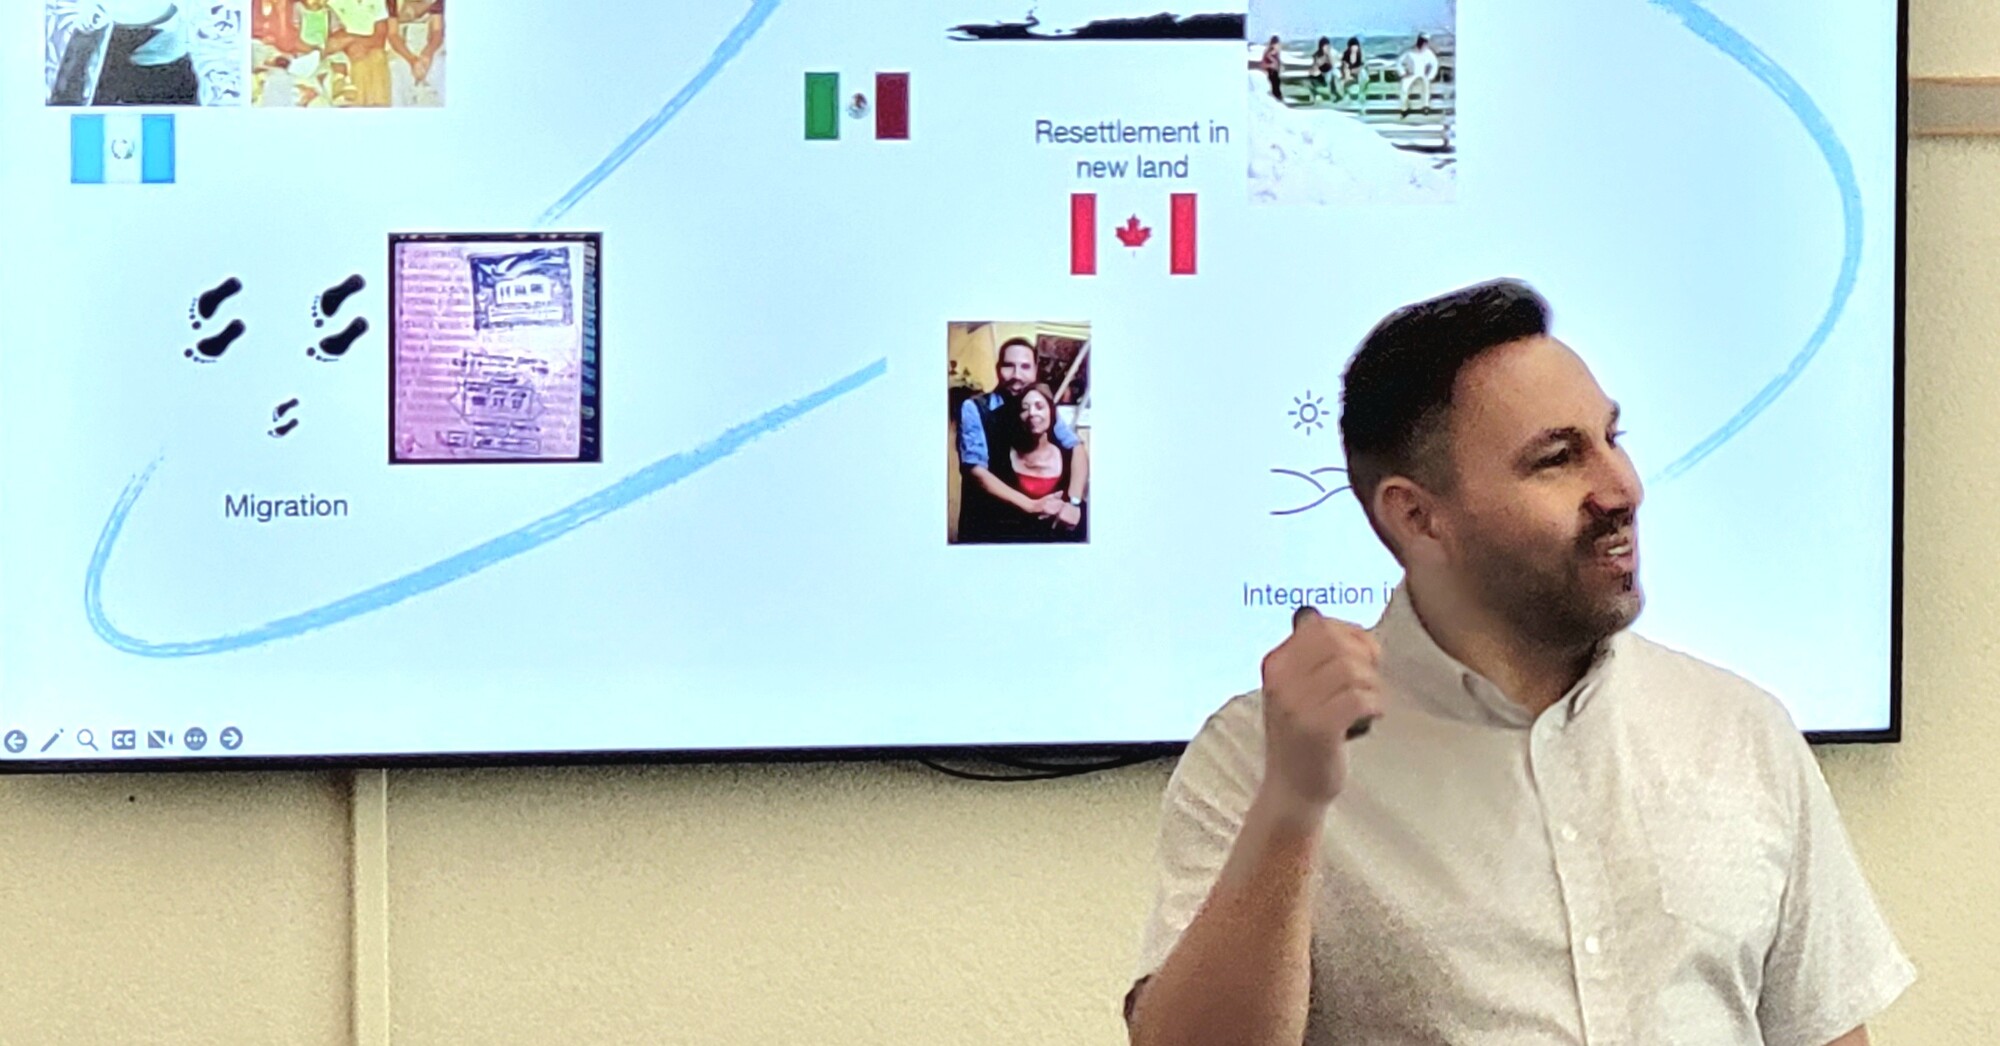 Saulo speaking in front of a group, pointing to a slideshow screen